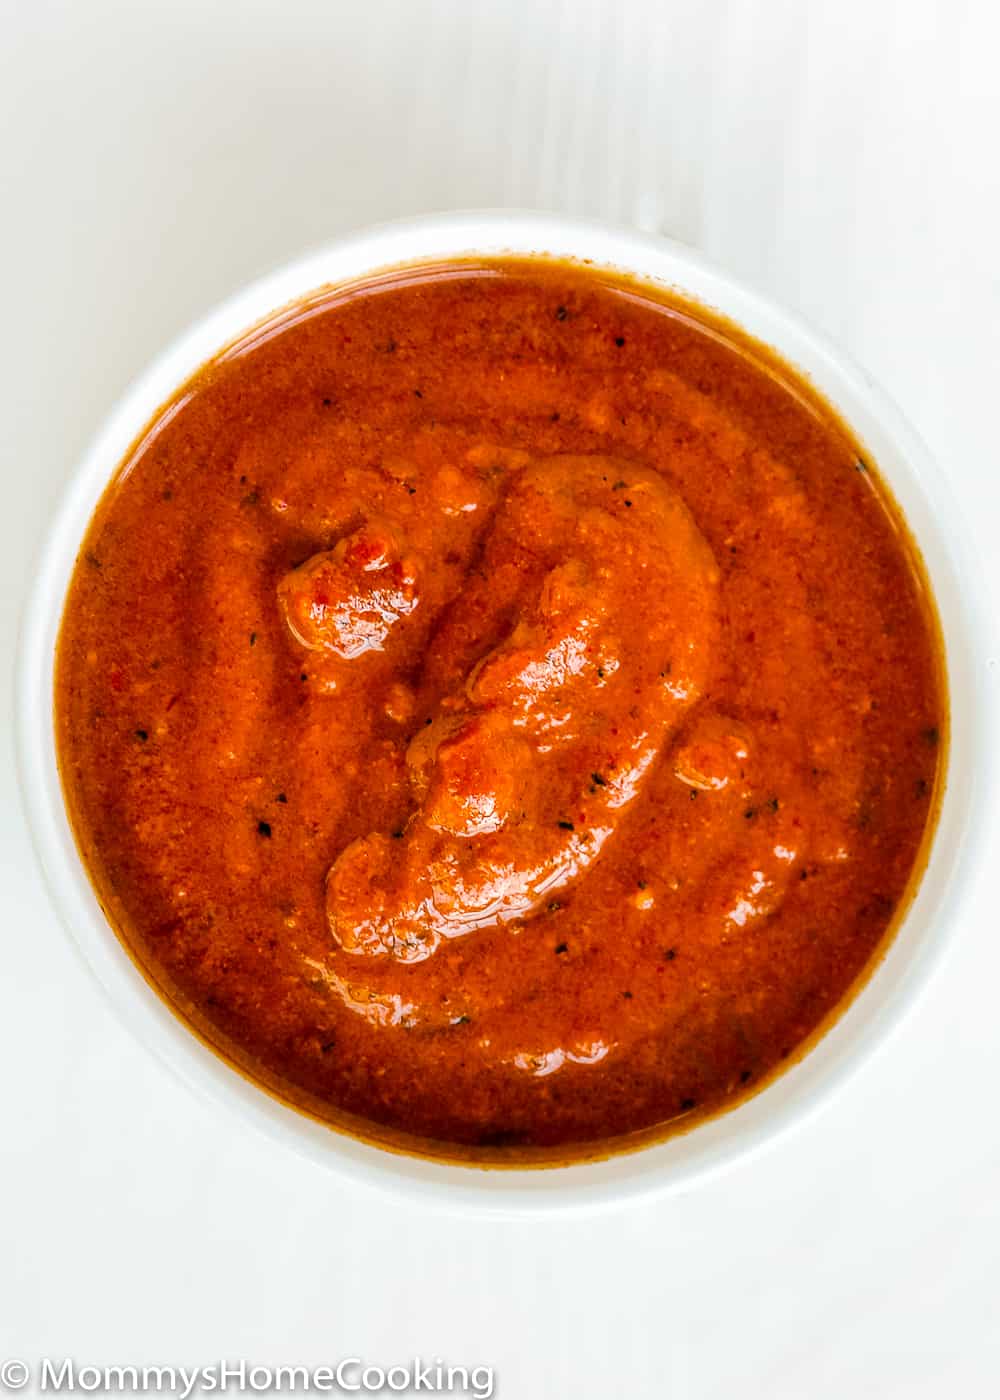 Chipotle sauce in a bowl